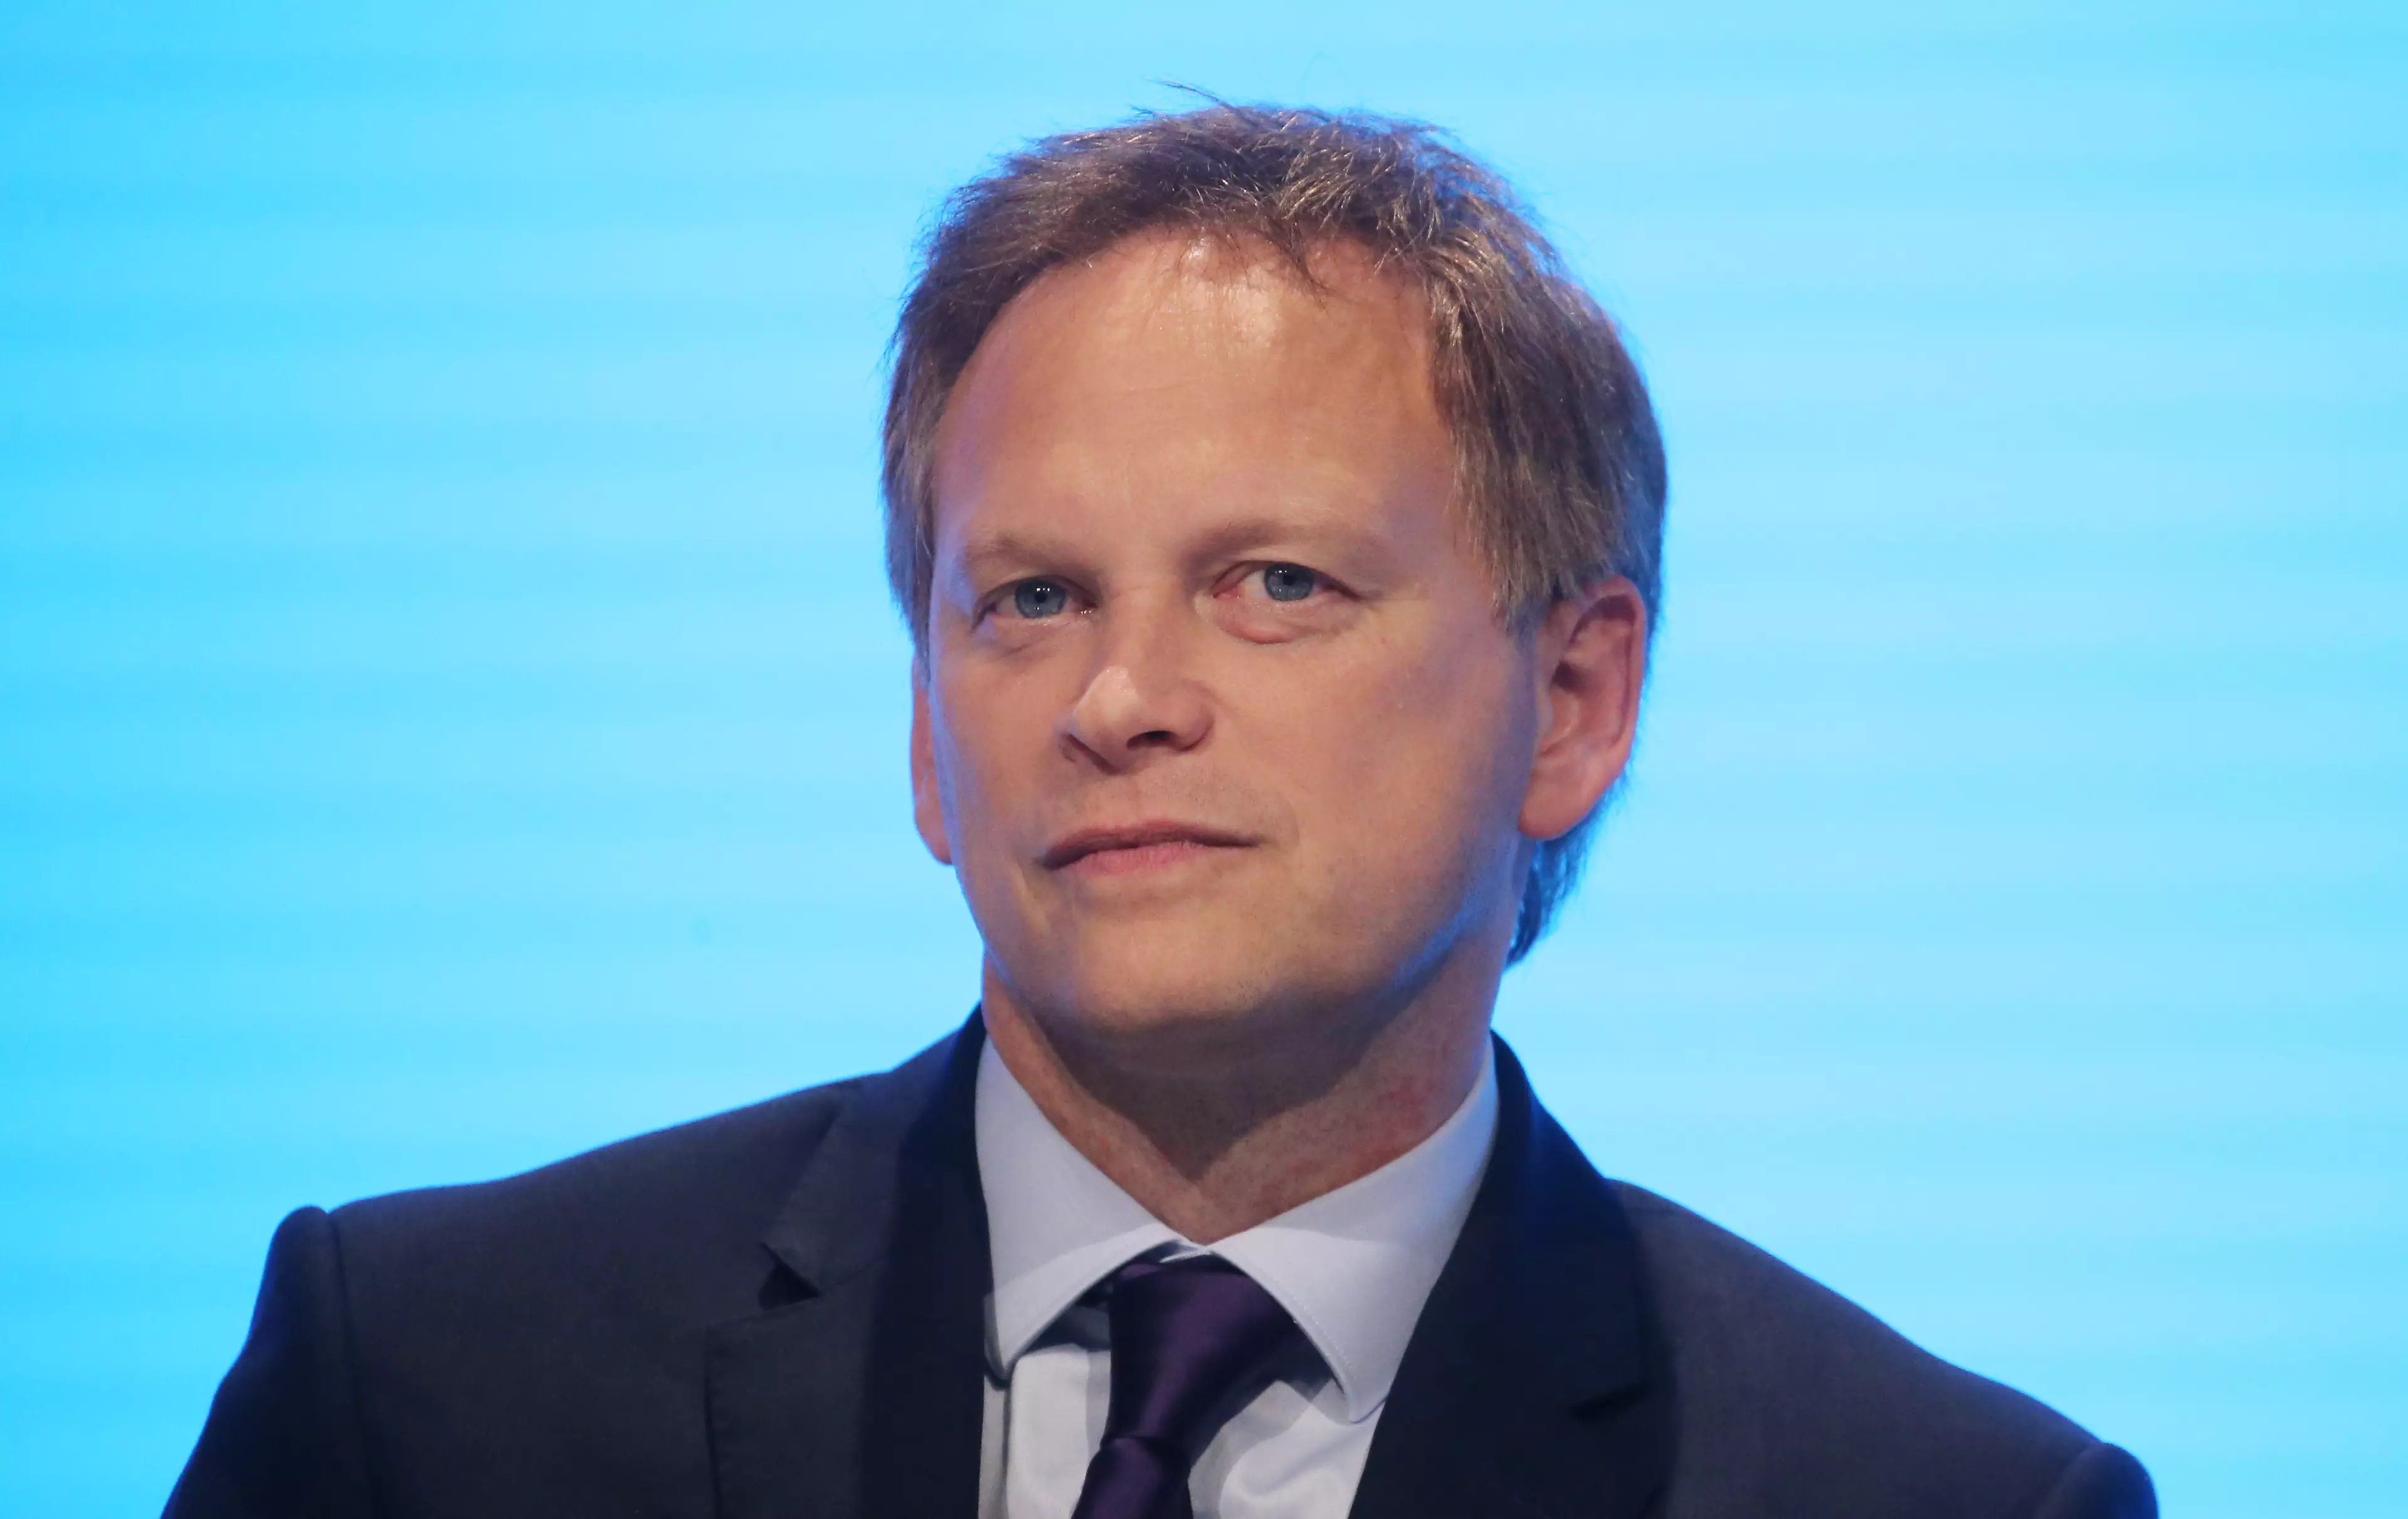 Transport Secretary Grant Shapps at the Conservative party conference.